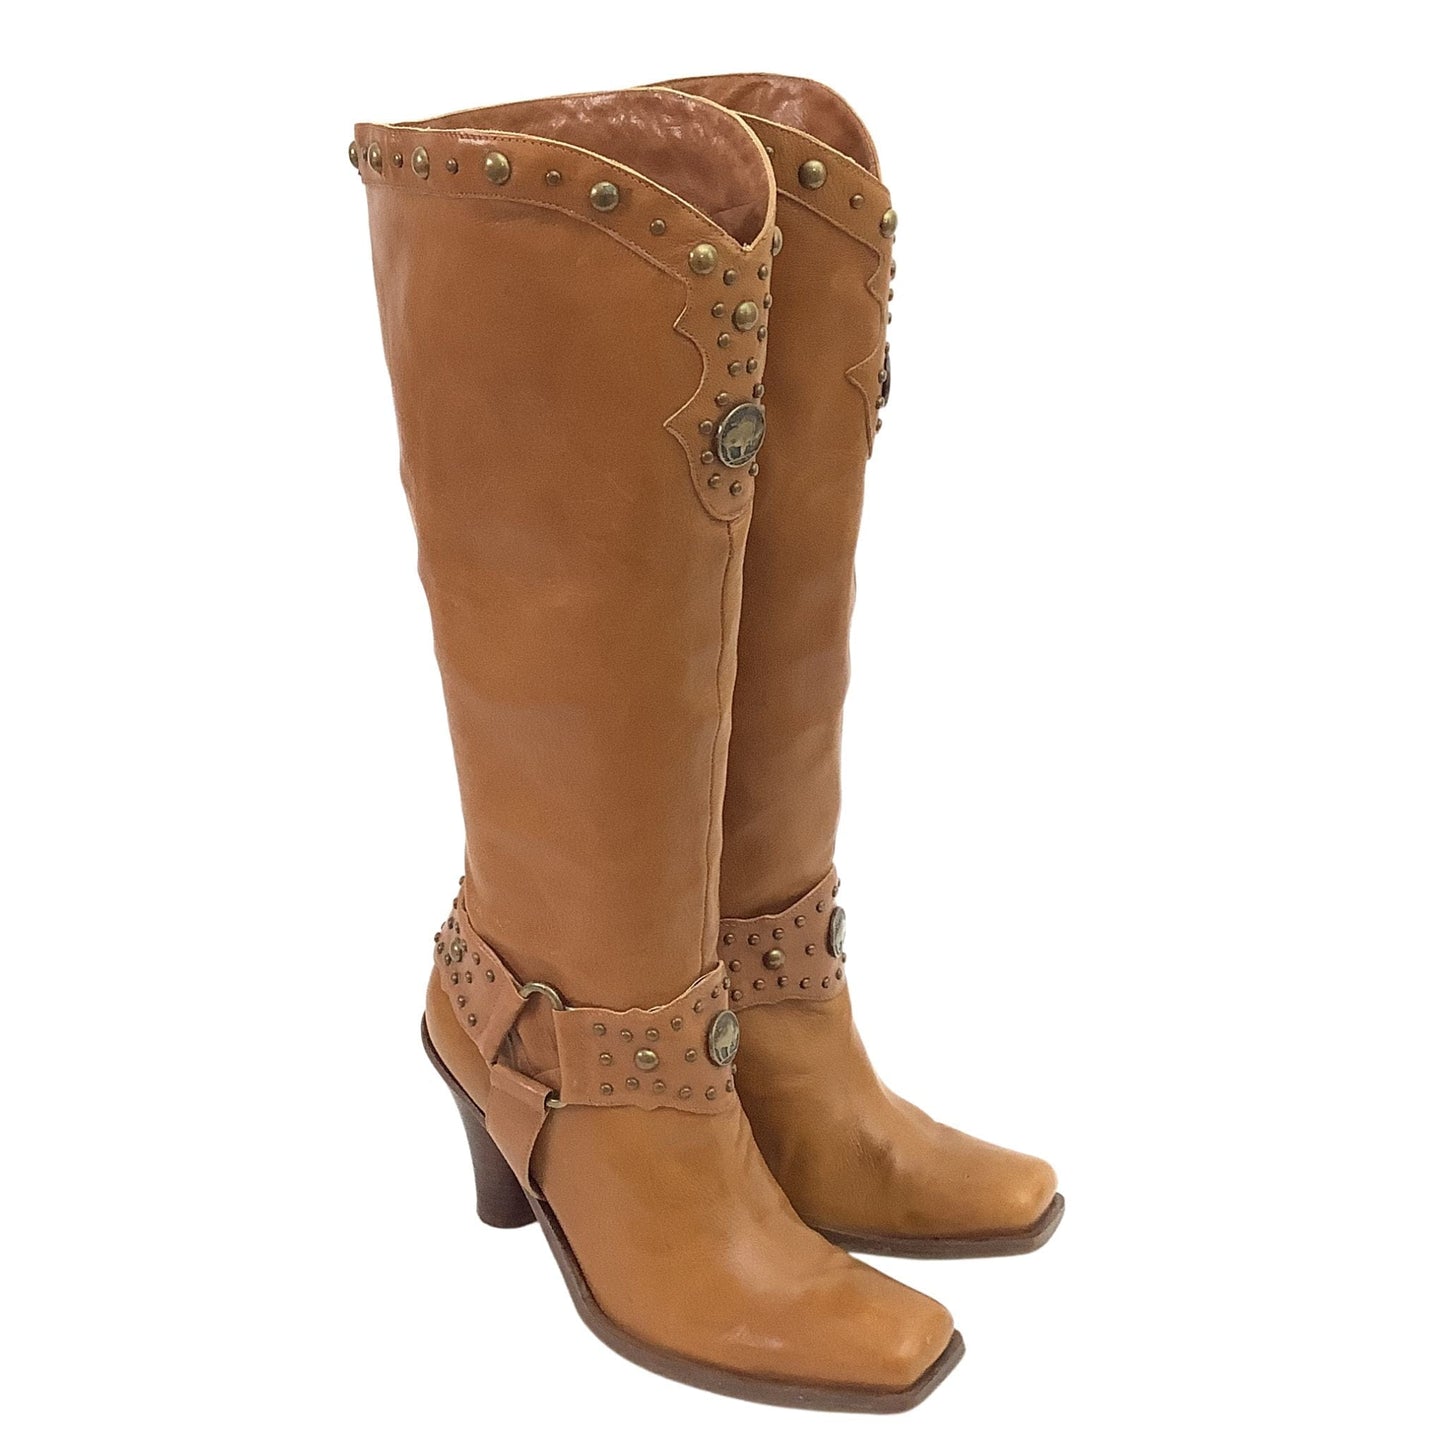 Studded Western Boots 7M / Tan / Y2K - Now